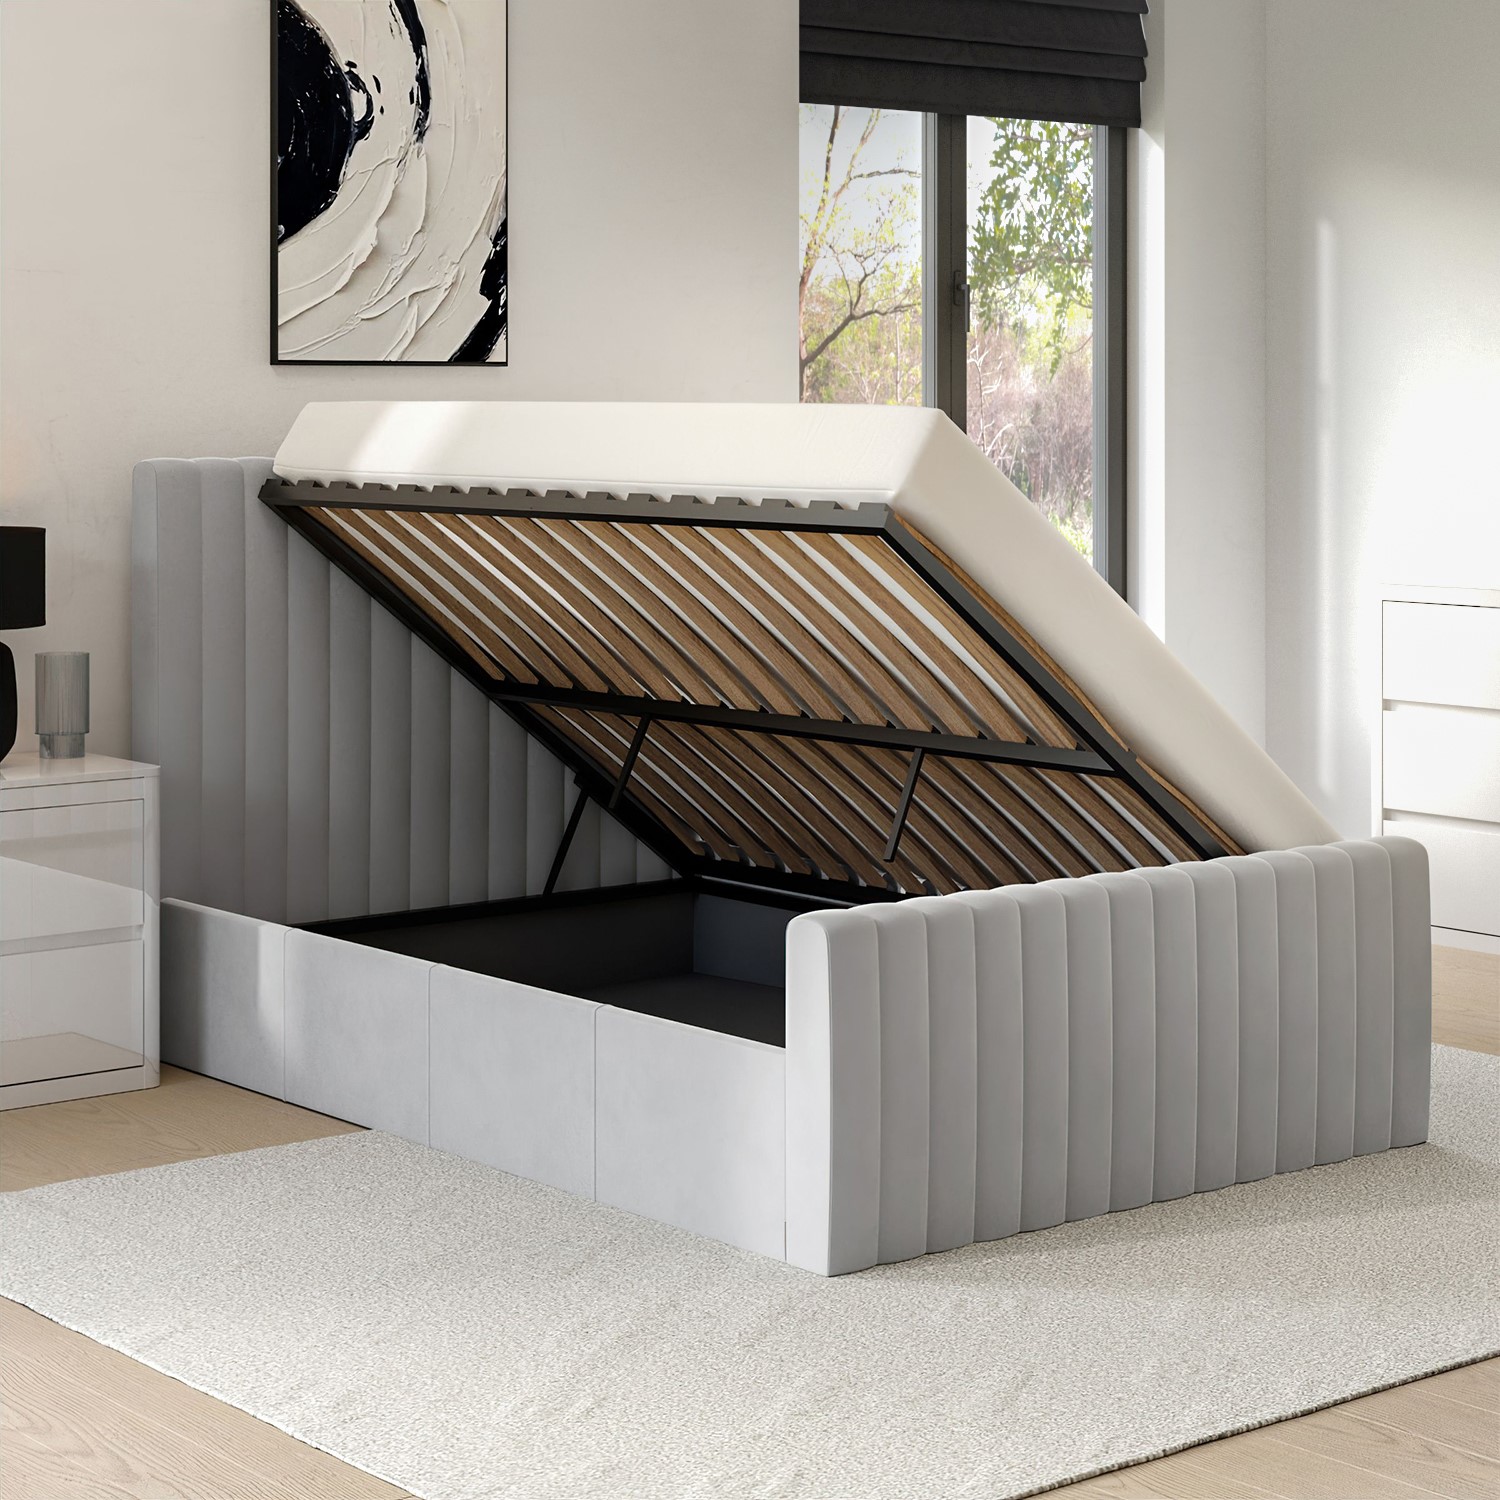 Read more about Side opening grey velvet double ottoman bed khloe